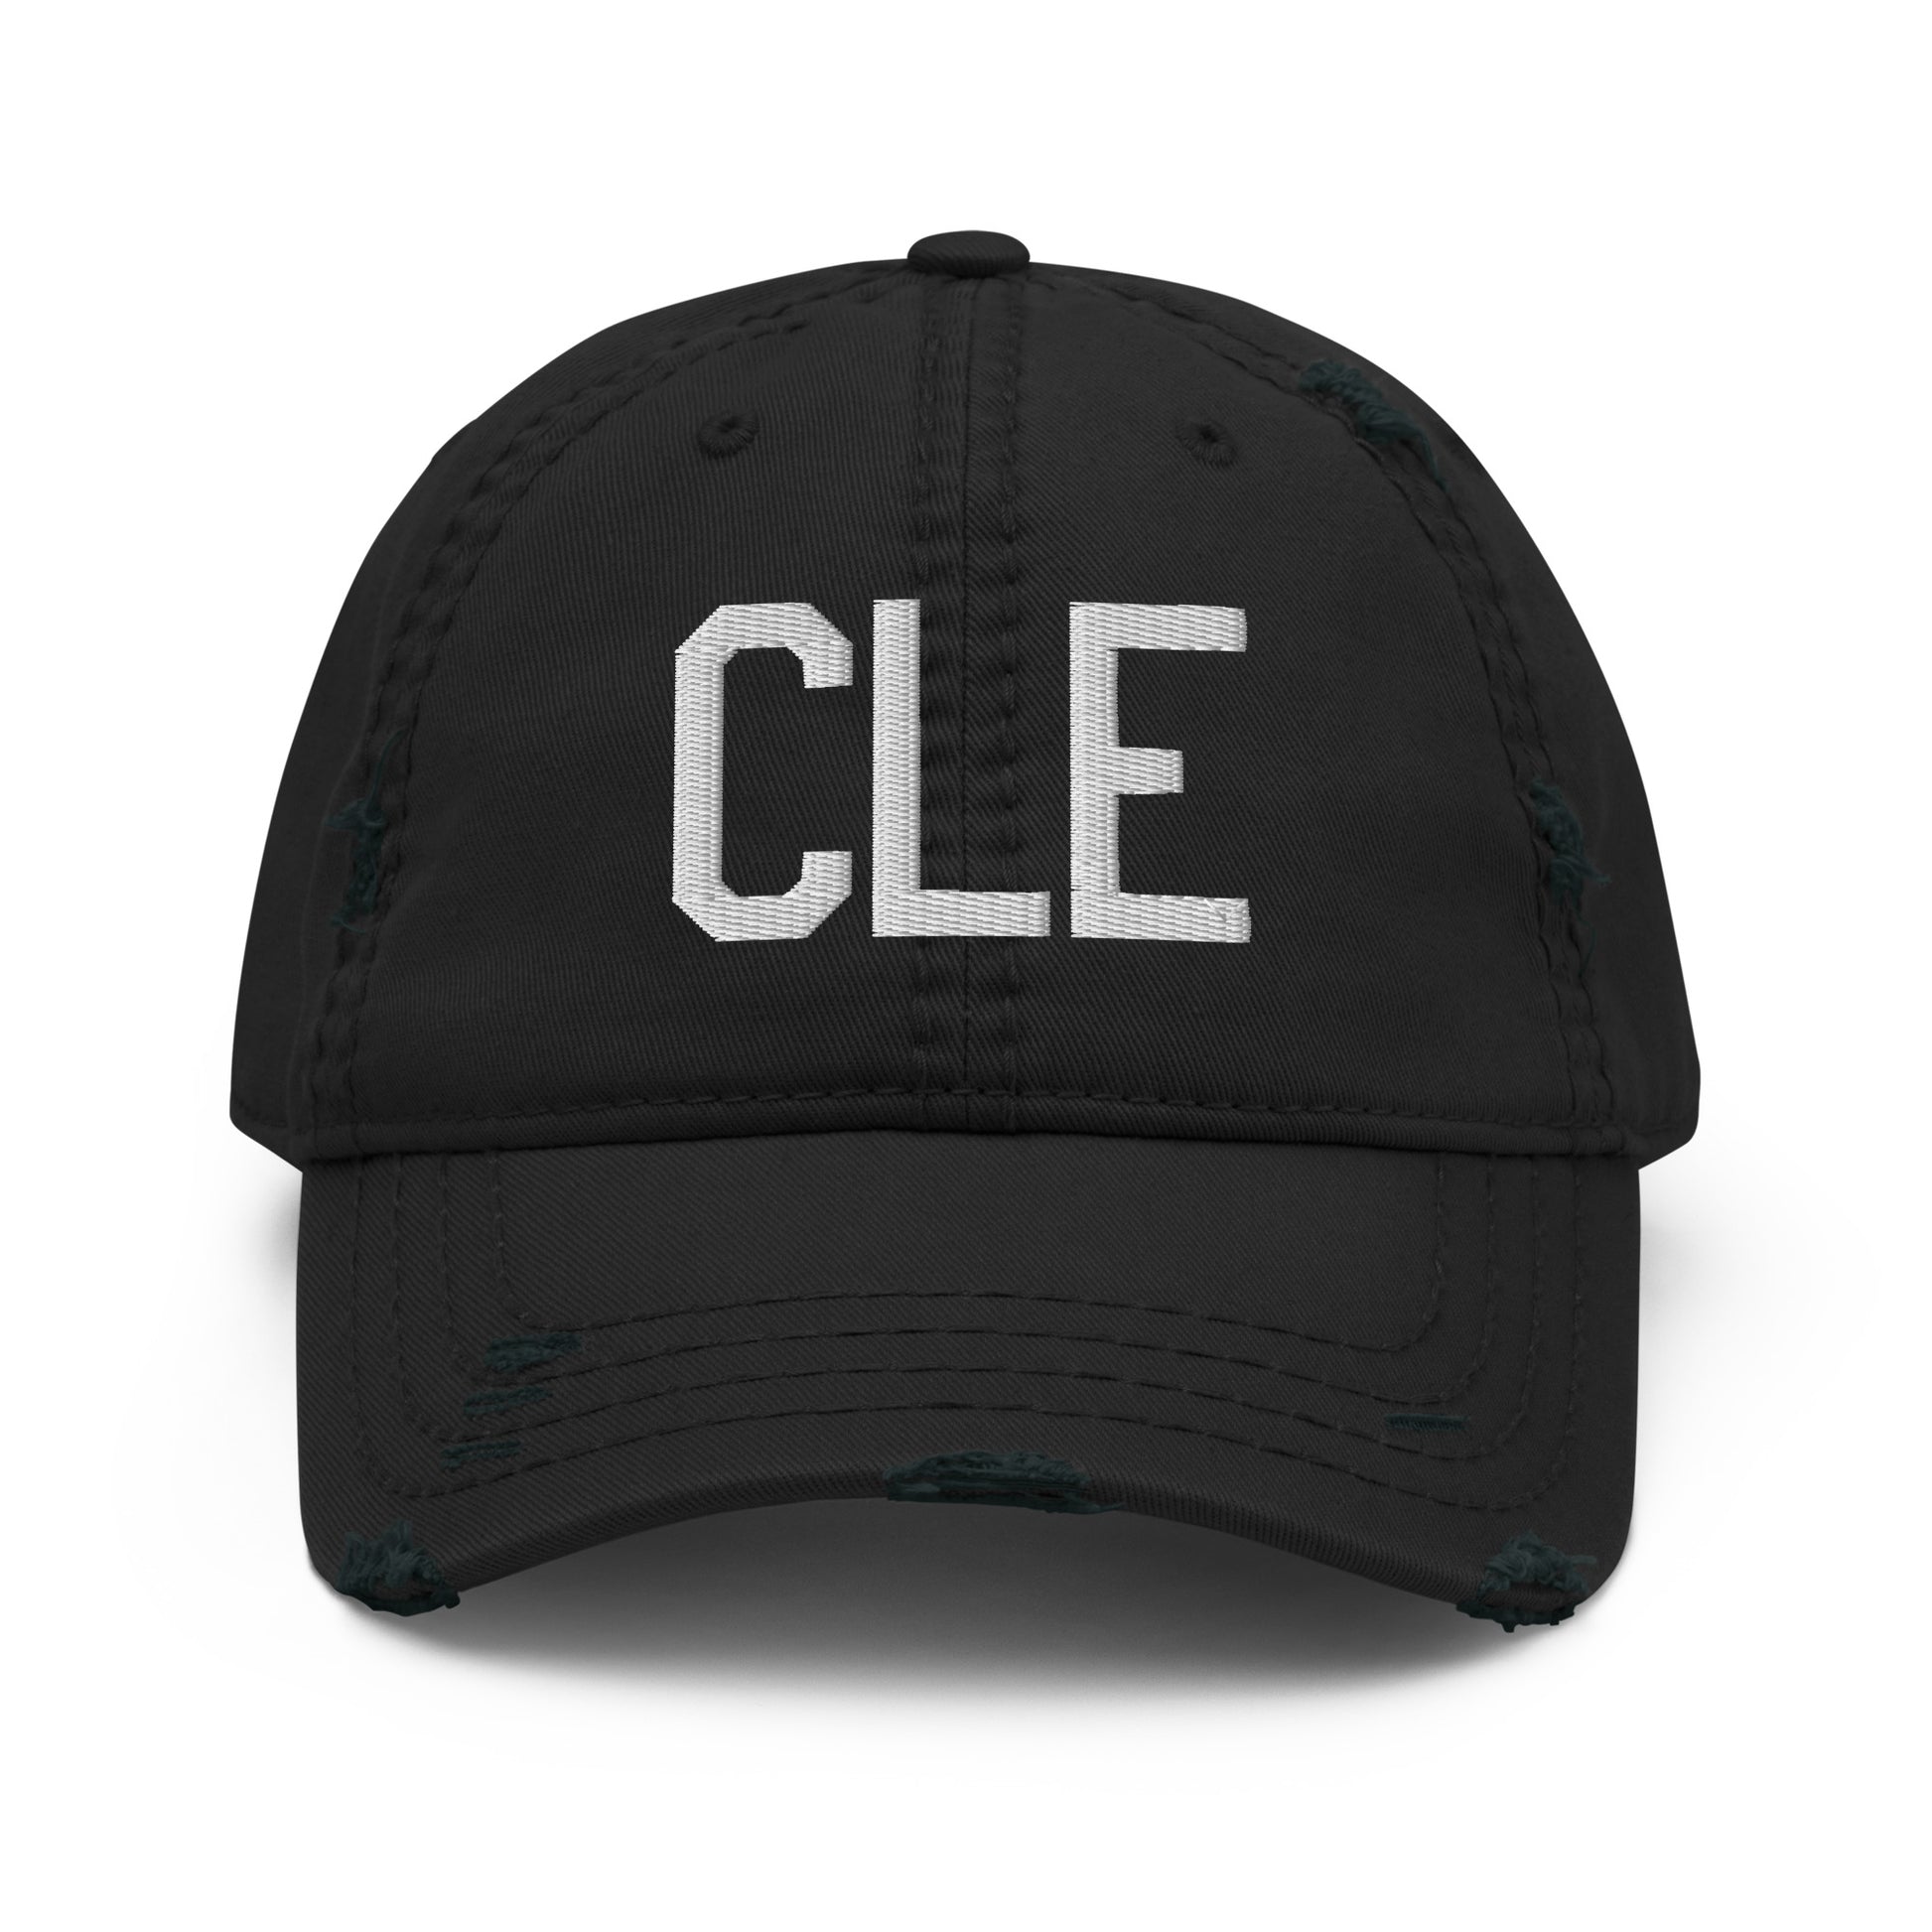 Airport Code Distressed Hat - White • CLE Cleveland • YHM Designs - Image 10